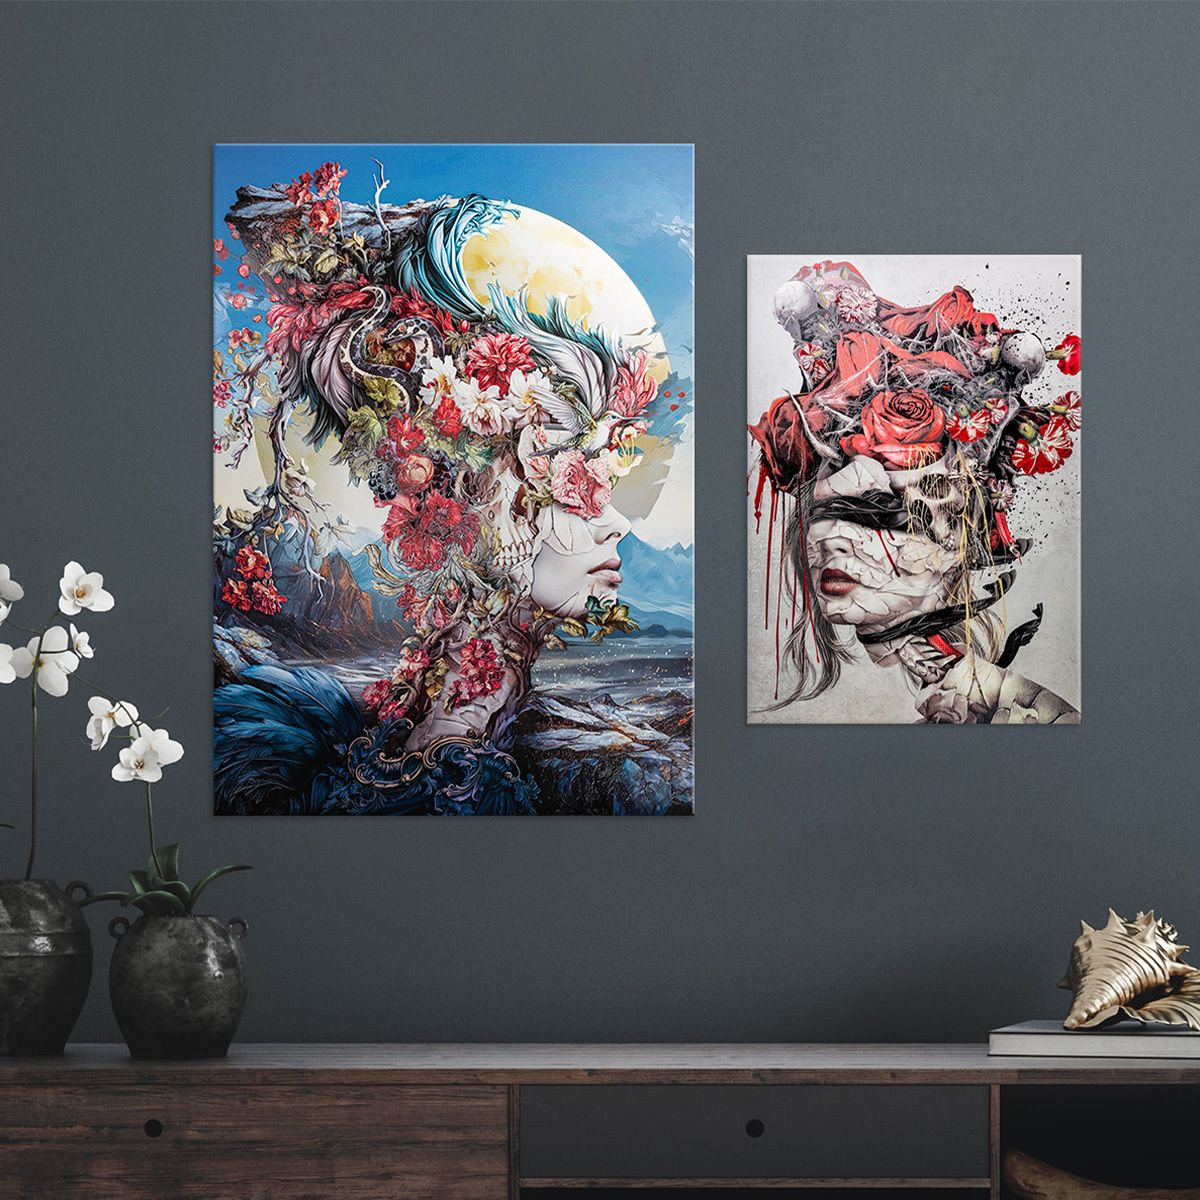 Displate Review: Metal Posters Worth the Hype?